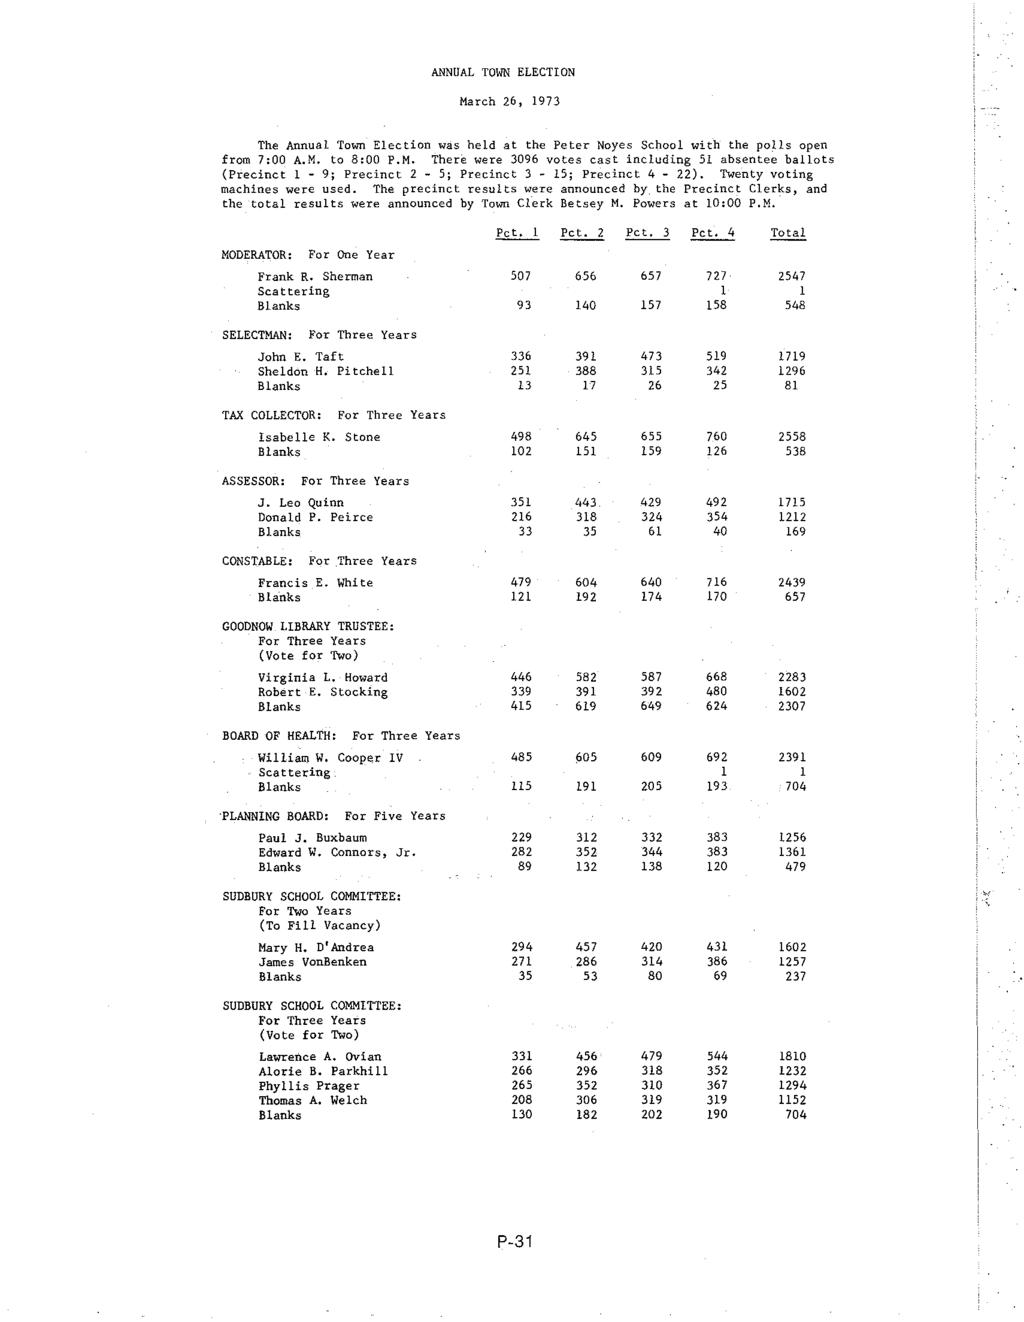 ANNUAL TOWN ELECTION March 26, 1973 The Annual Town Election was held at the Peter Noyes School with the polls open from 7:00 A.M. to 8:00 P.M. There were 3096 votes cast including 51 absentee ballots (Precinct 1-9; Precinct 2-5; Precinct 3-15; Precinct 4-22).